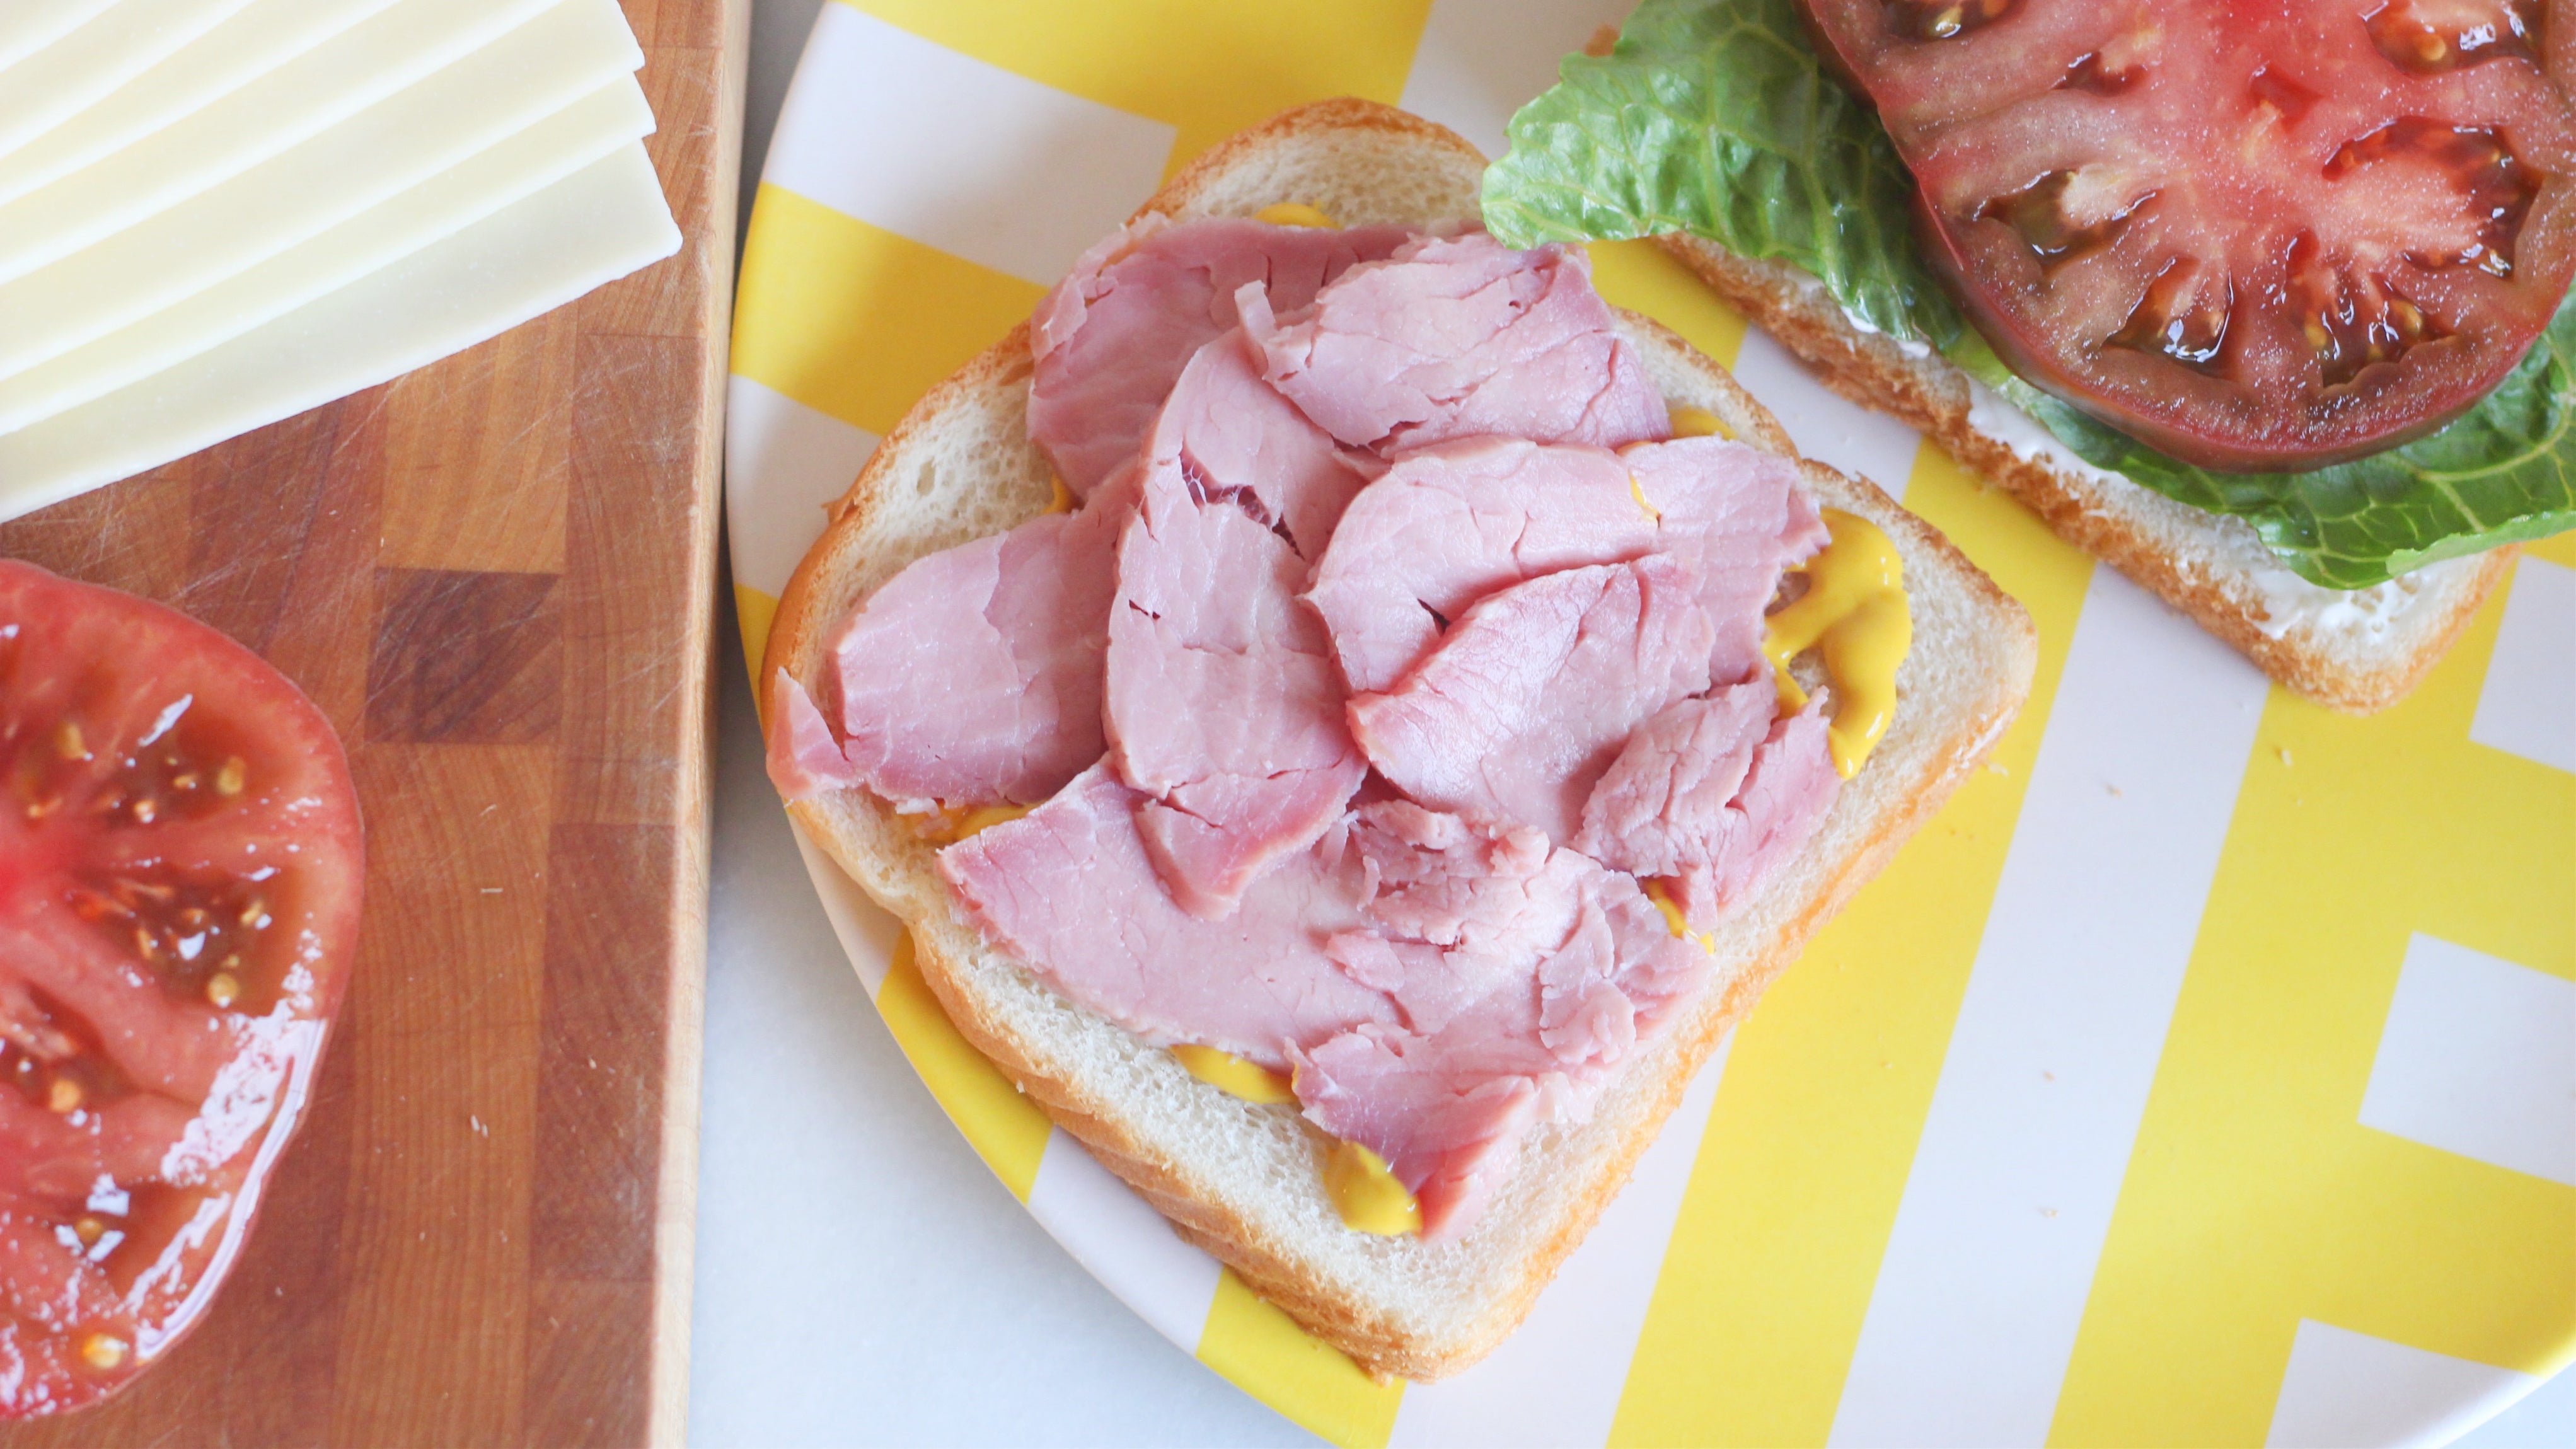 Precision Cook Your Own Excellent Cold Cuts